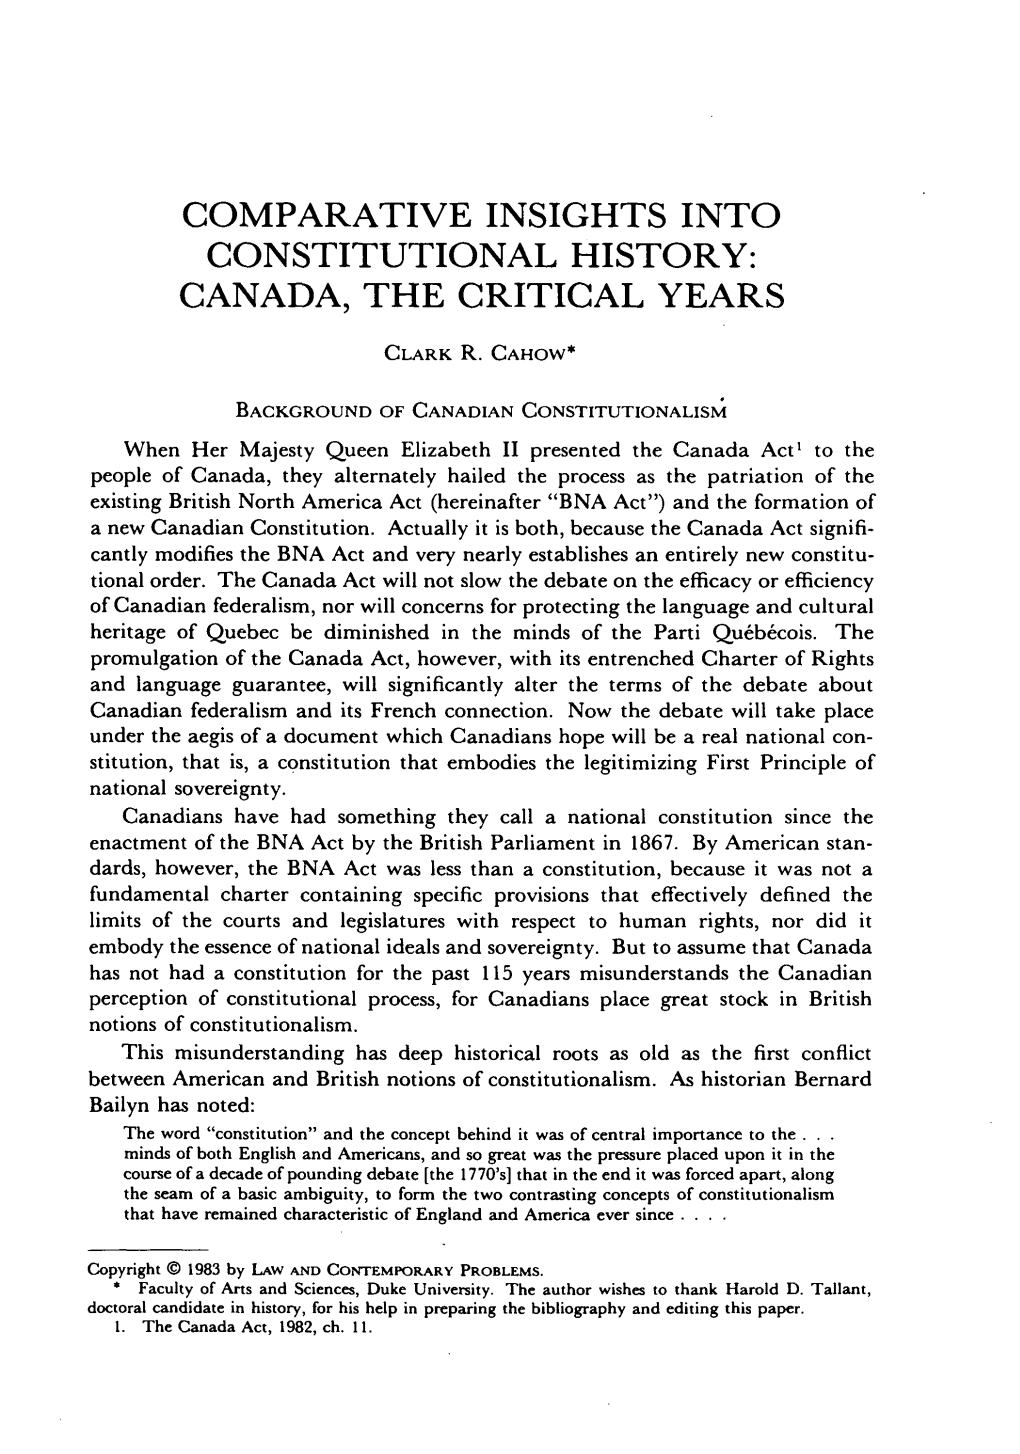 Comparative Insights Into Constitutional History: Canada, the Critical Years